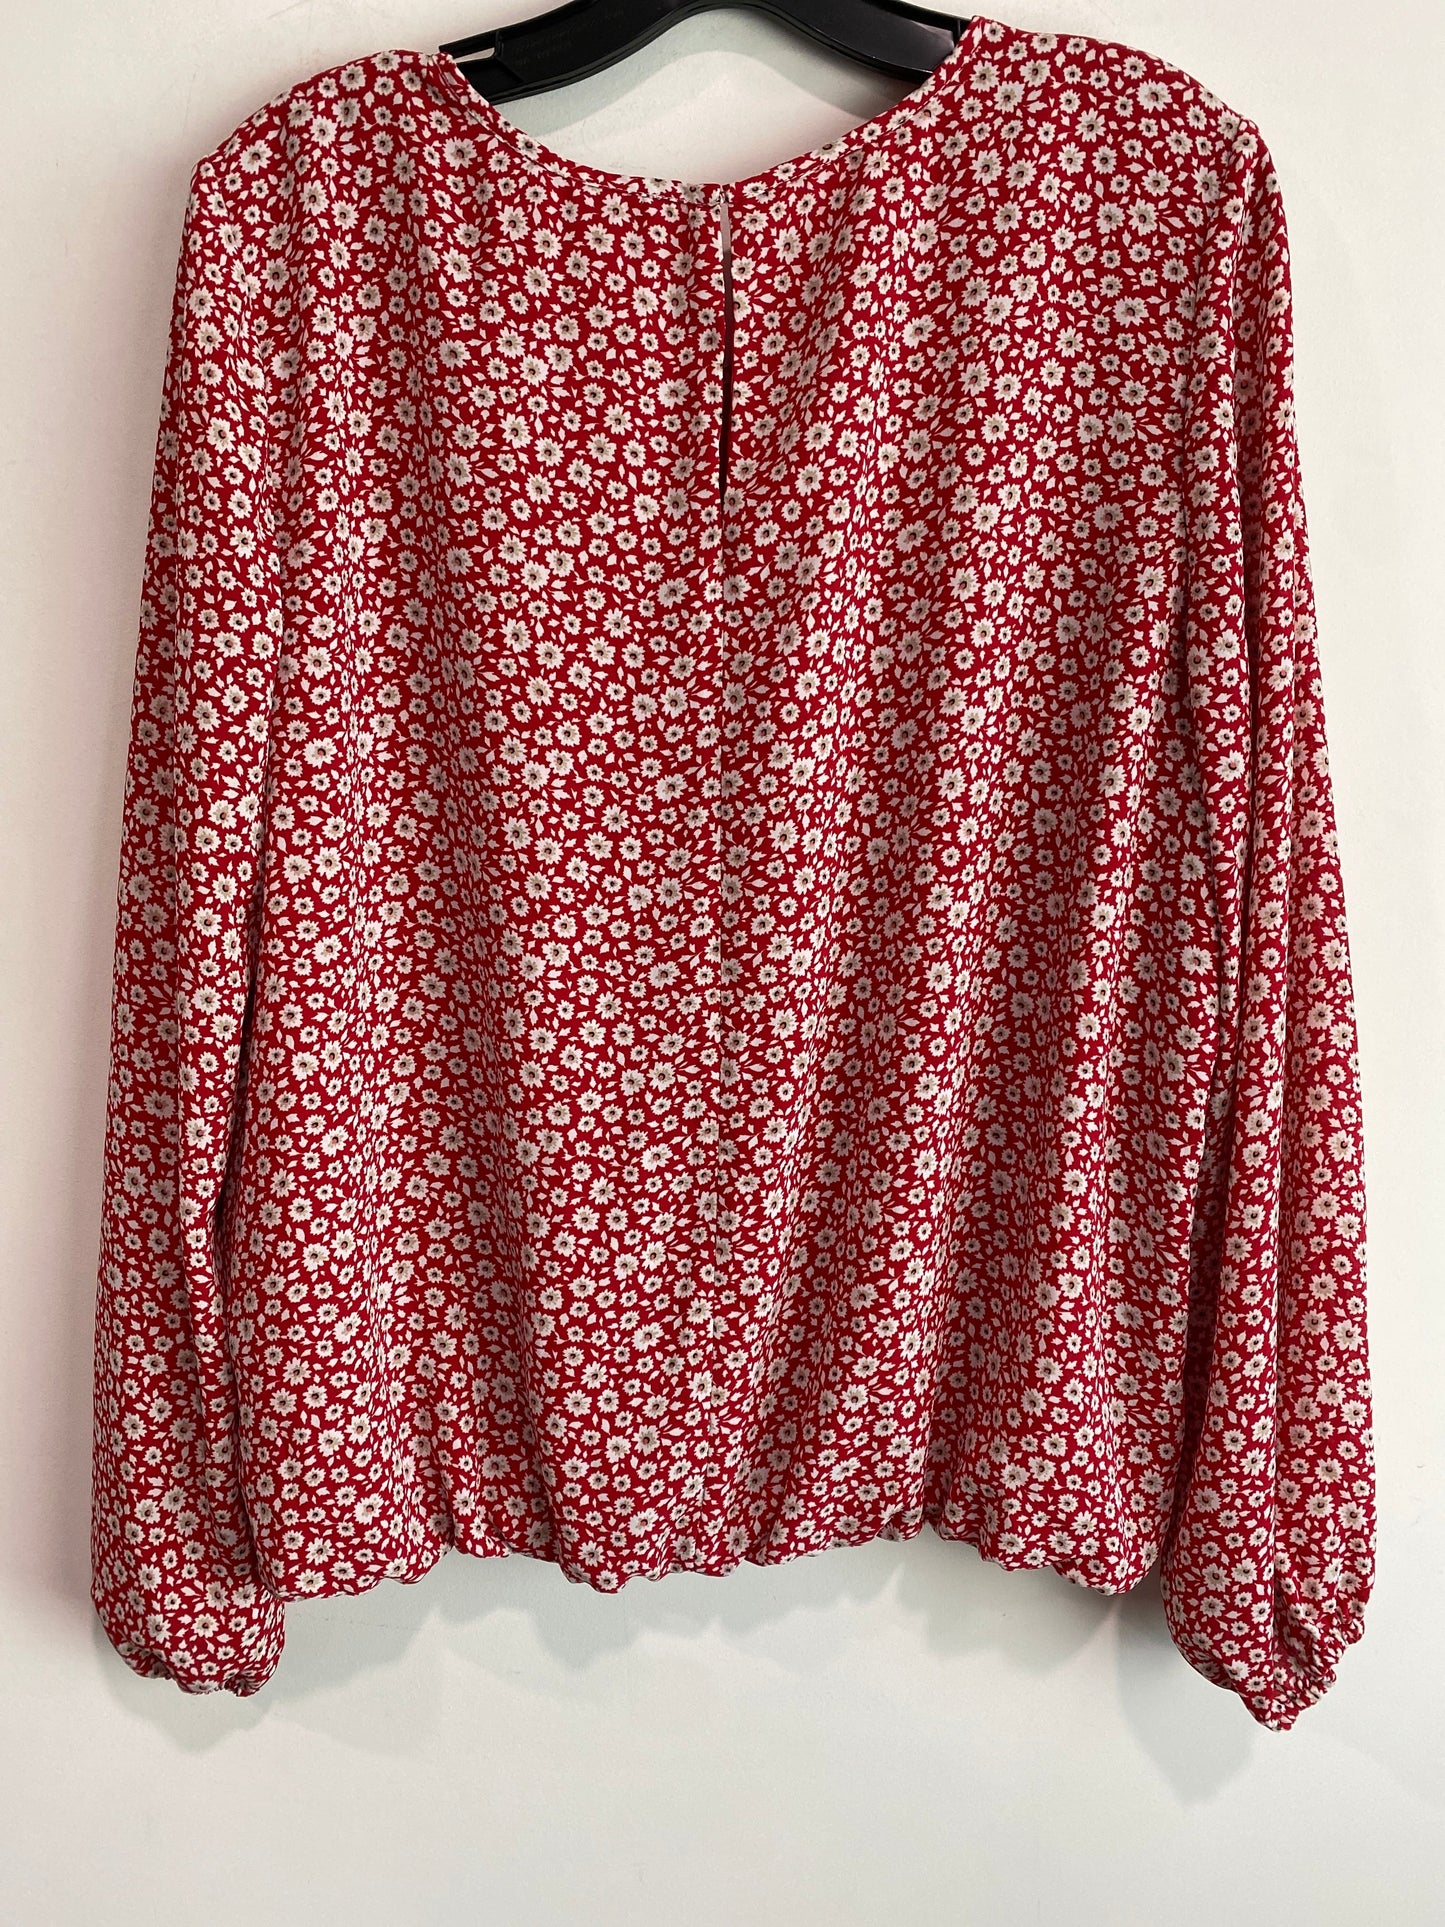 Red Top Long Sleeve Tommy Hilfiger, Size Xl